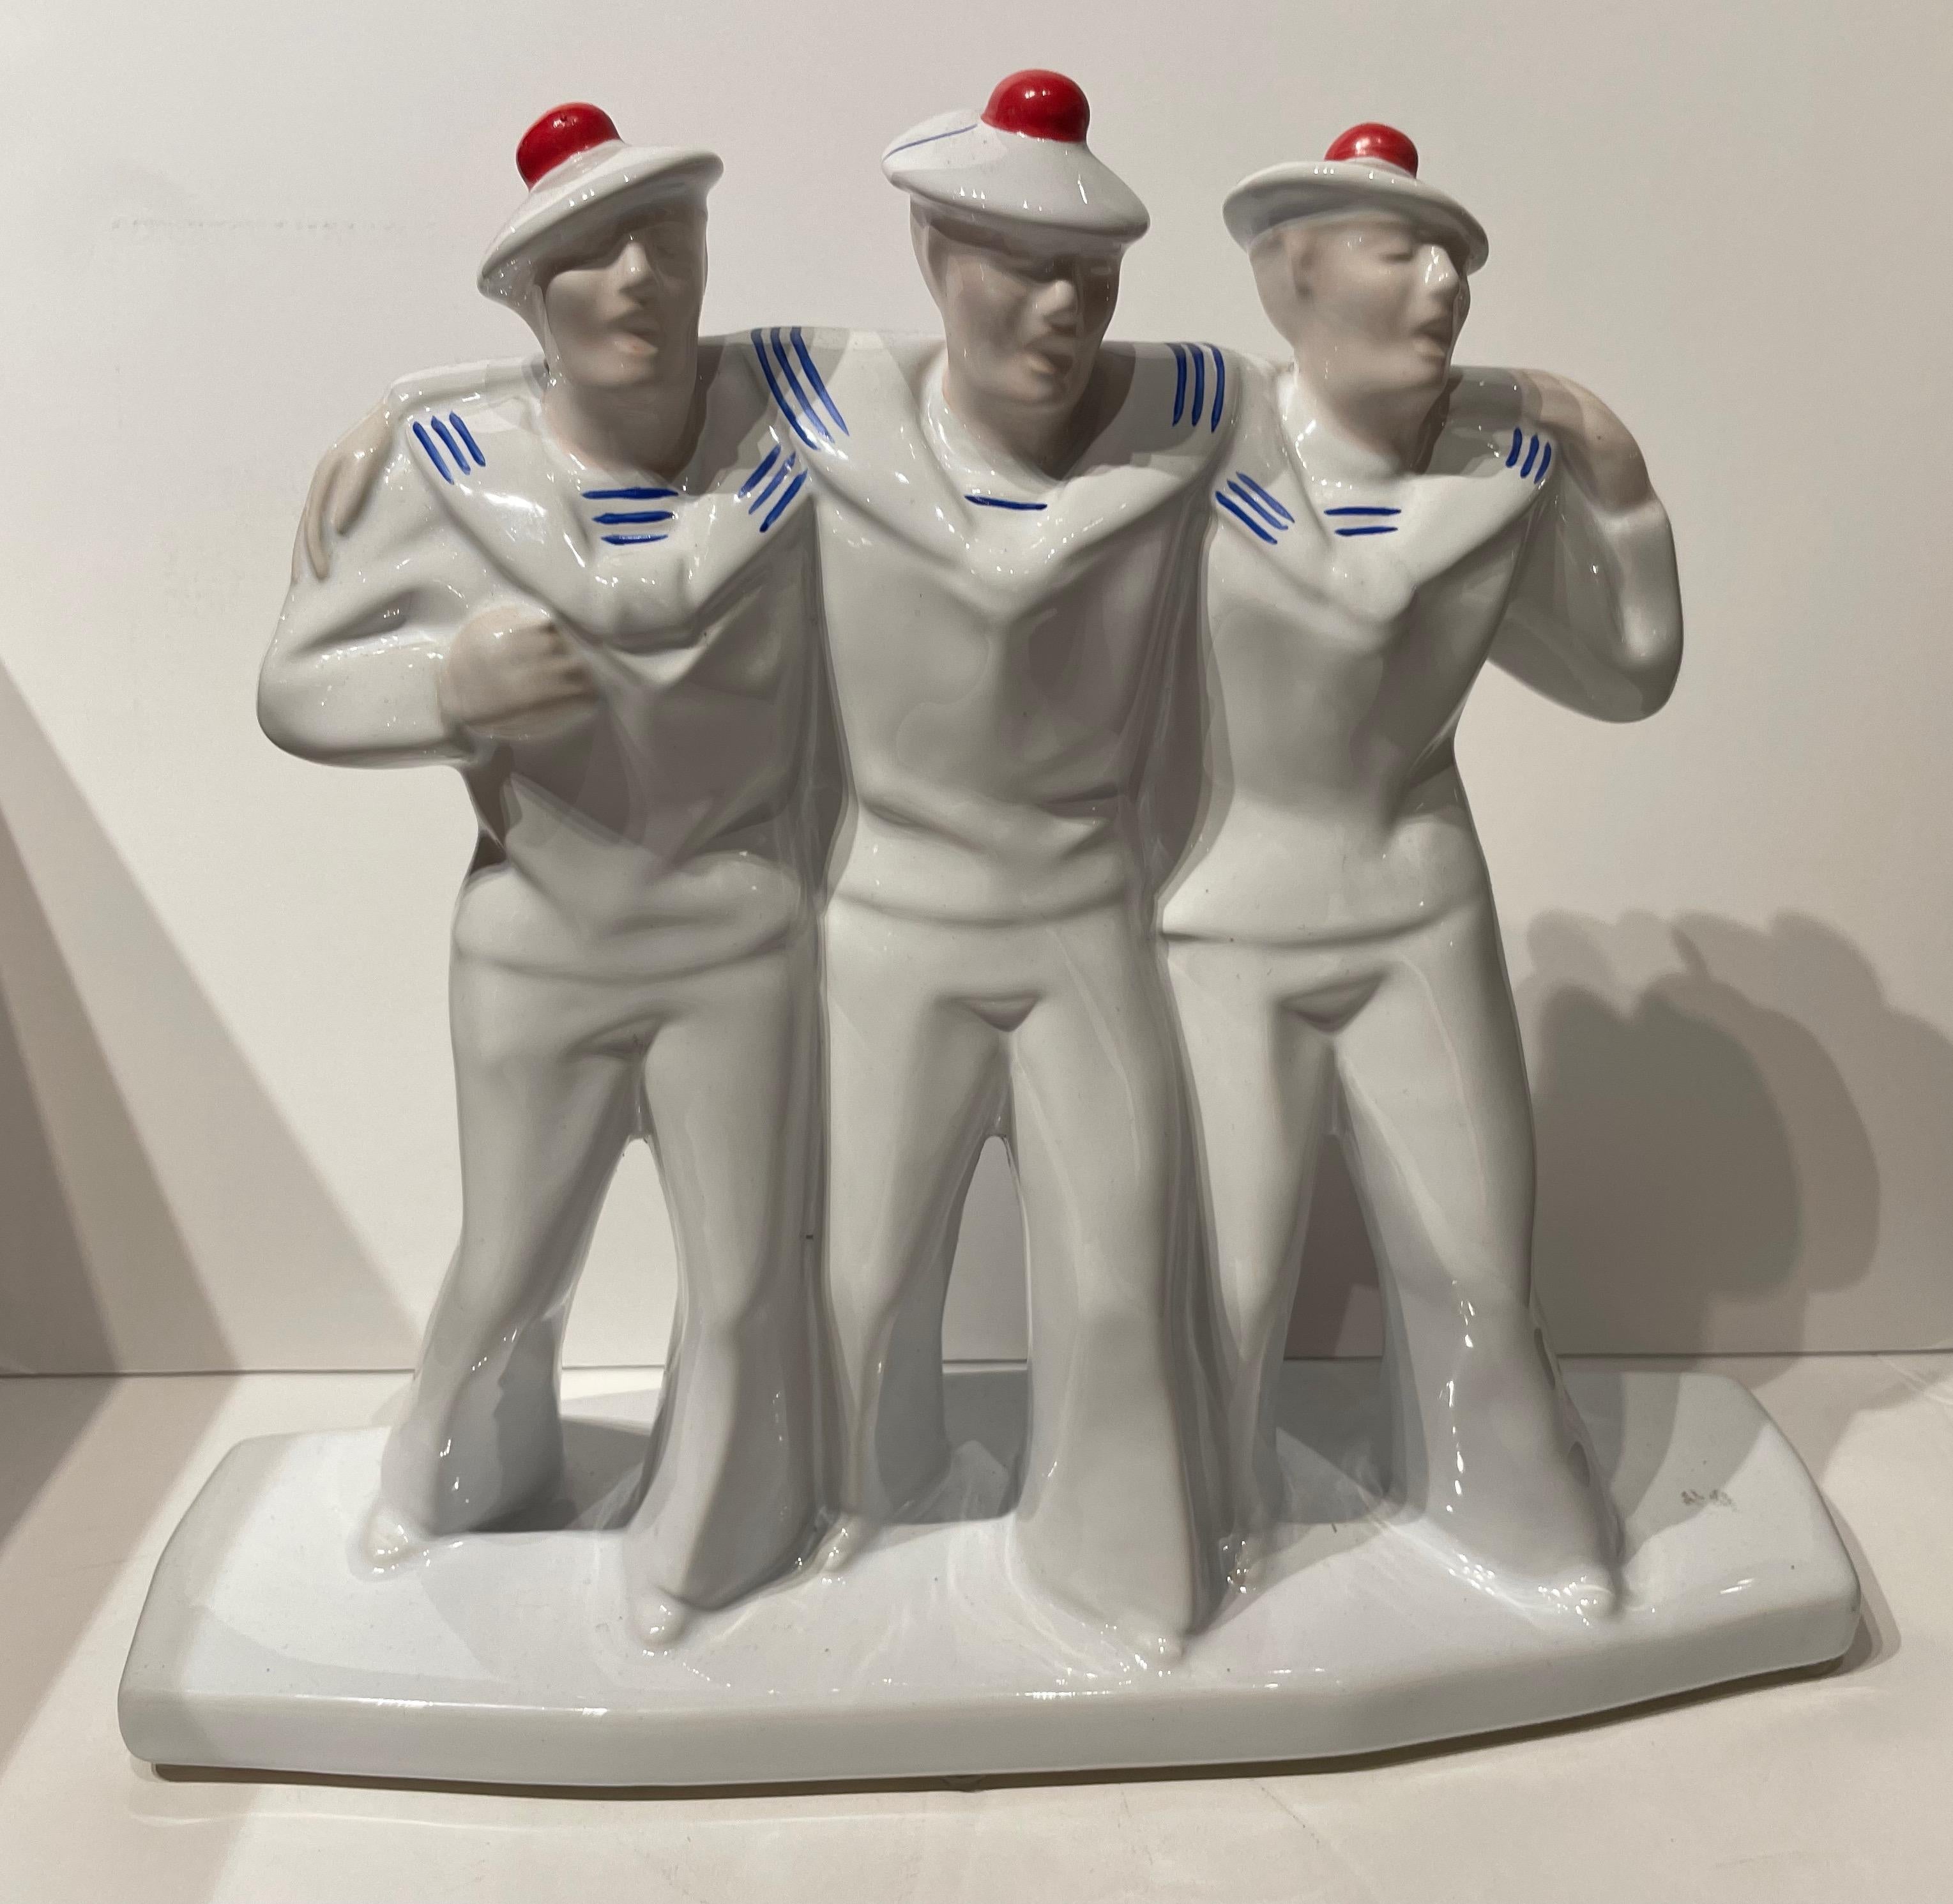 French Matelots Singing Sailors Dax Art Deco Group. Art Deco Sailors on Leave Earthenware Ceramic Sculpture. The iconic original at the height of Art Deco was designed by Edouard Cazeaux for the French manufacturer Dax. White earthenware with